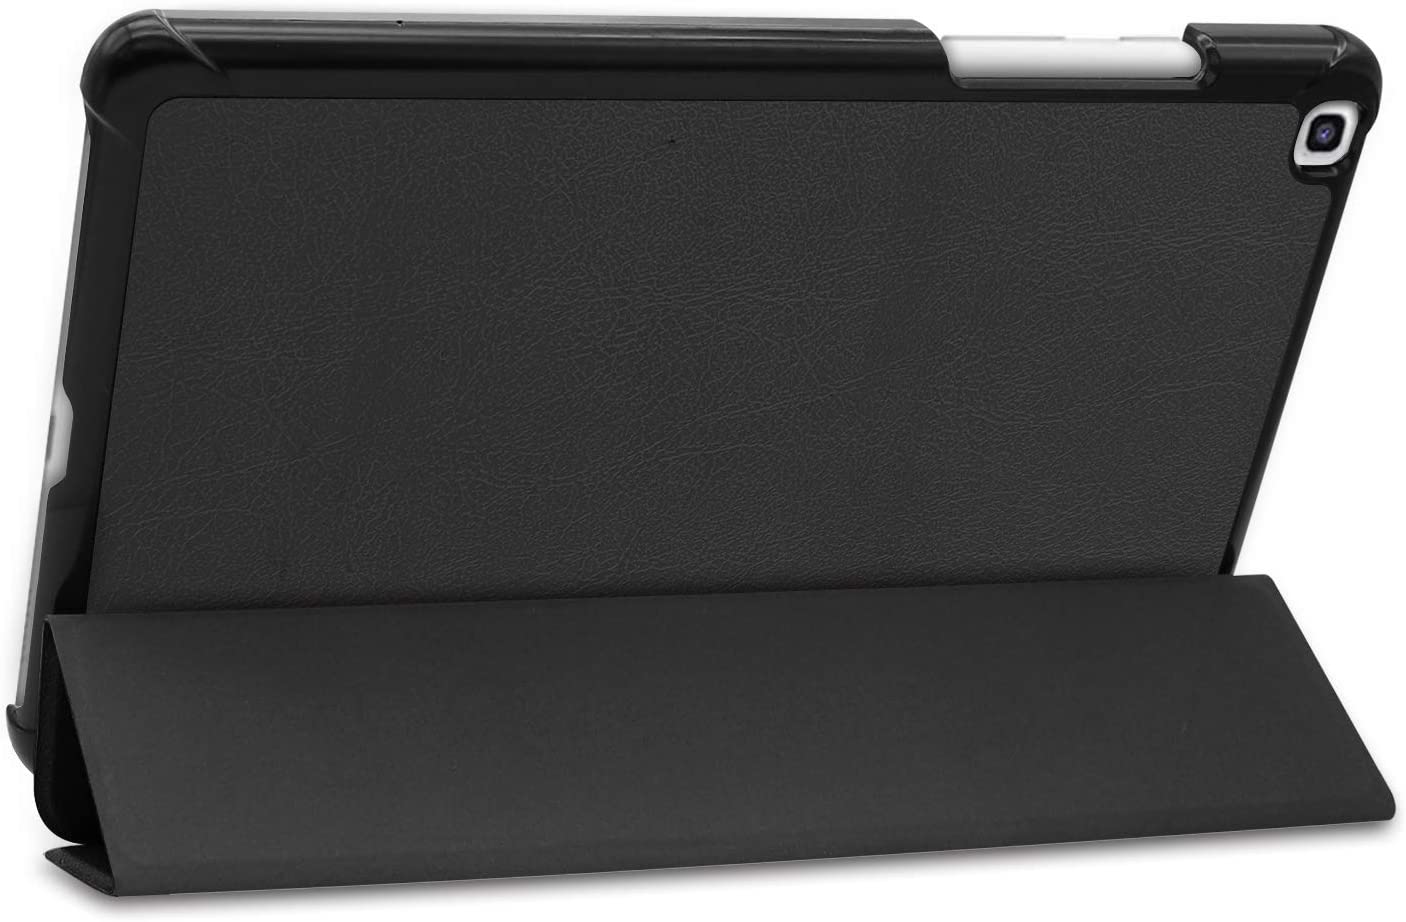 Smart Case for Samsung Tab A 8.0 2019, Ratesell Smart Trifold Stand Microfiber Lining Case Cover - BLACK - e4cents